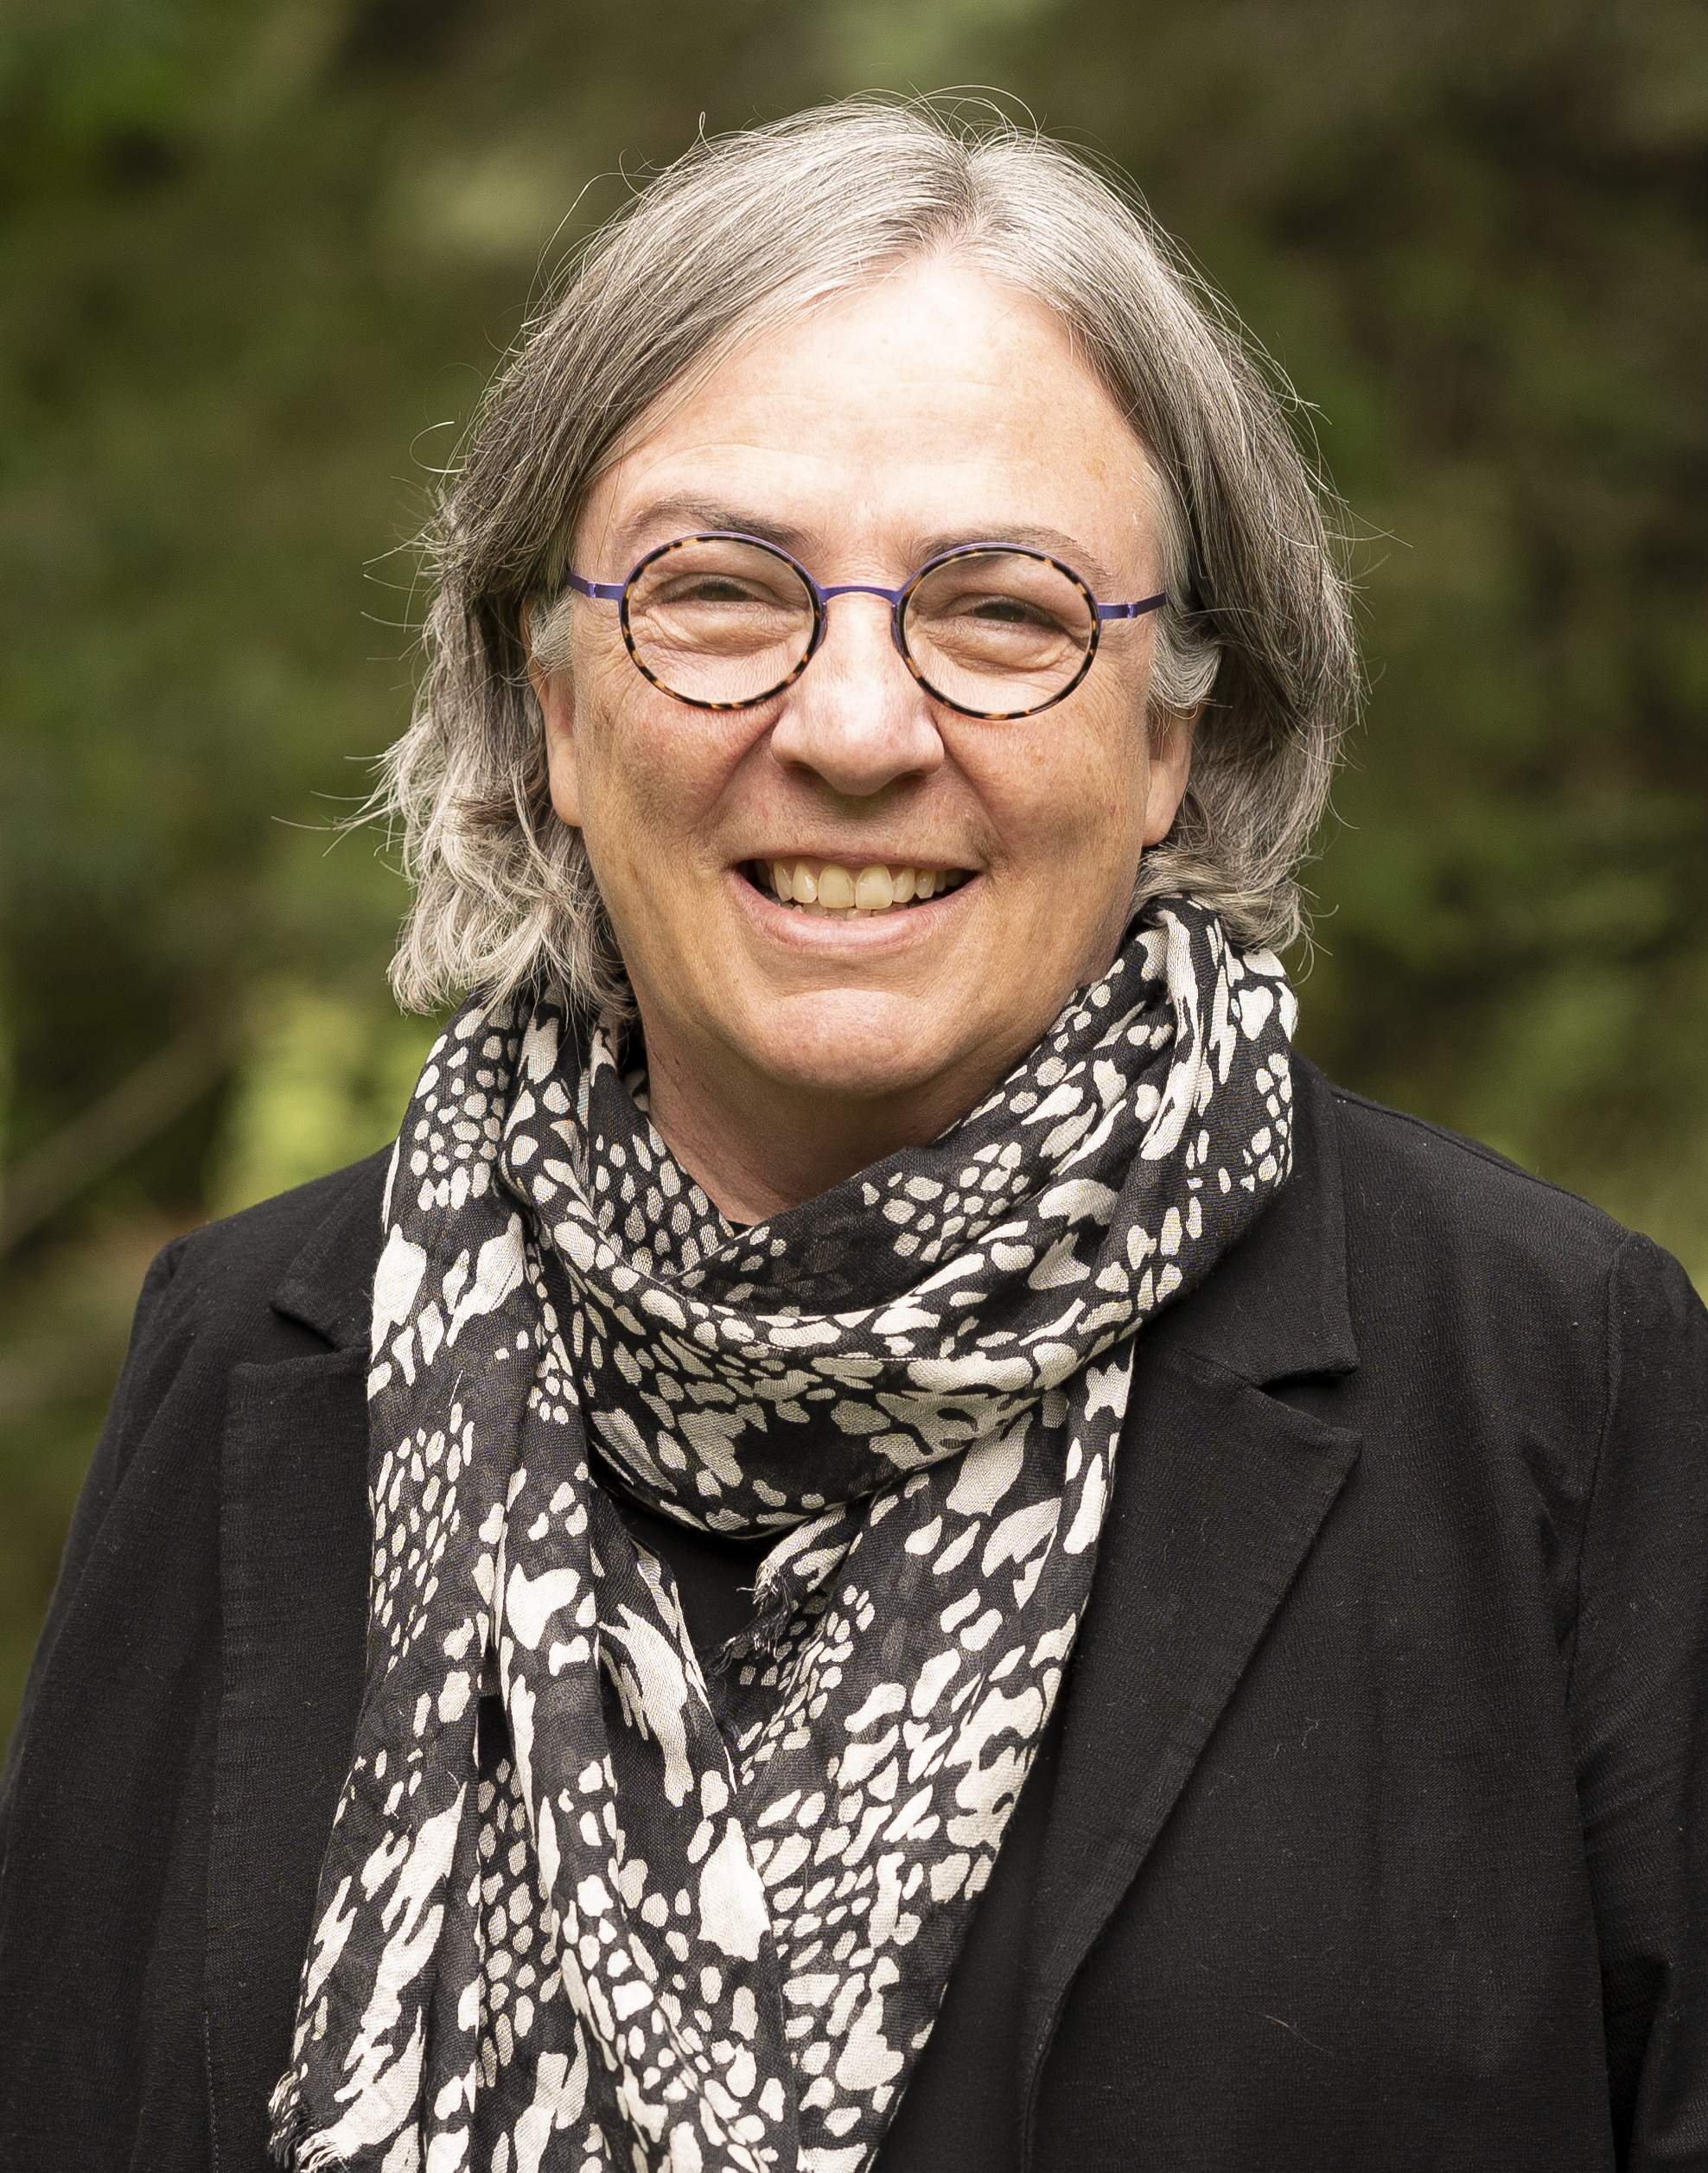 Head and shoulders view of Dr. Gillian Siddall outside wearing a black blazer and a white and black patterned scarf